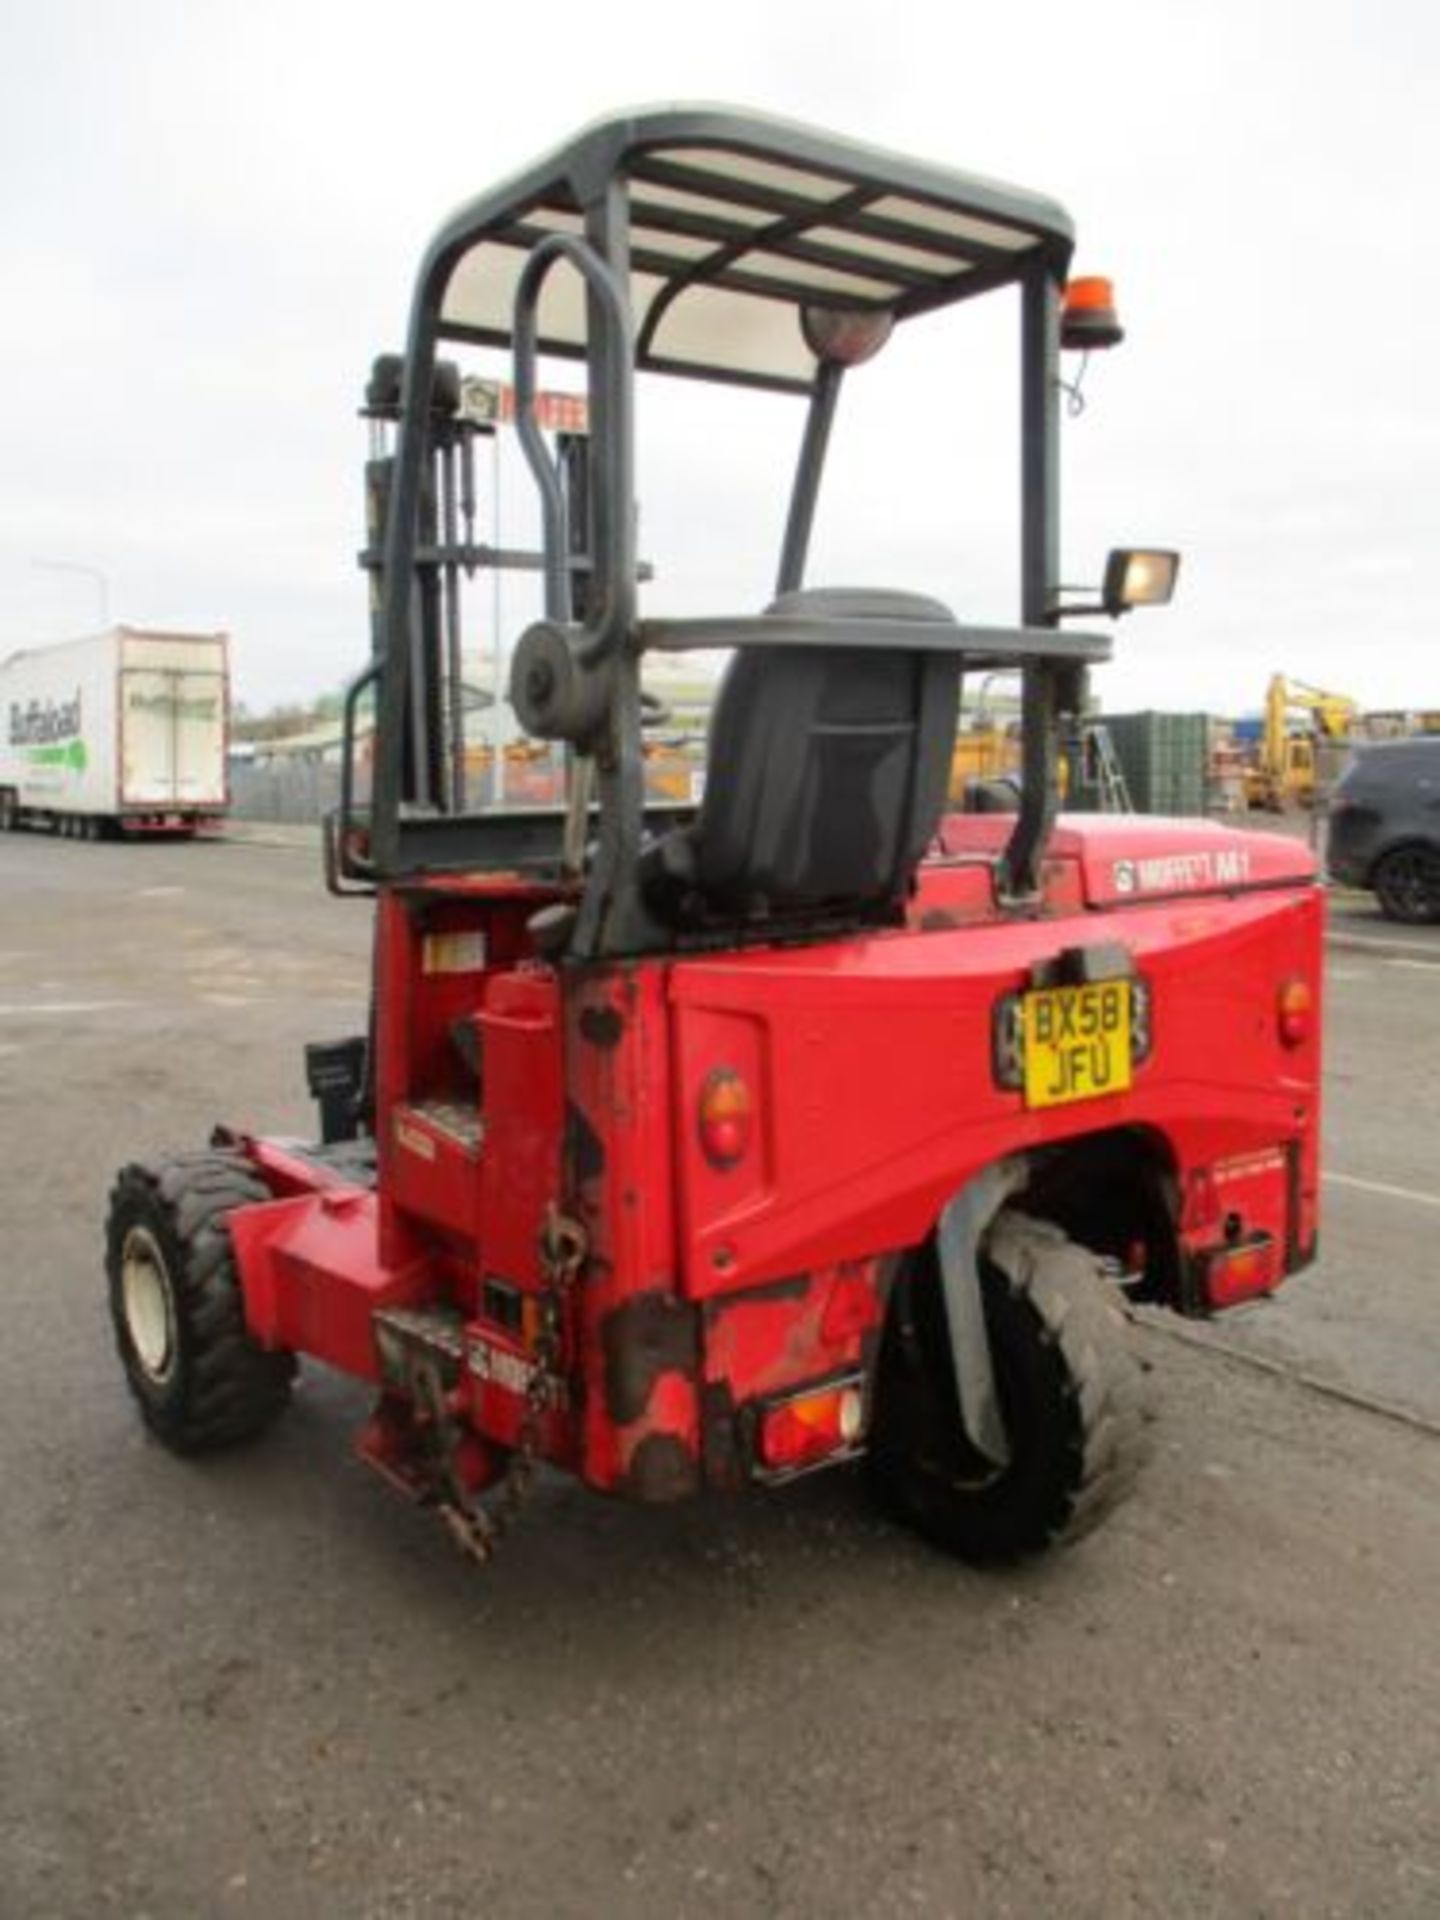 2009 MOFFETT MOUNTY M5 20.3 FORK LIFT FORKLIFT TRUCK MOUNTED LOLER DELIVERY - Image 4 of 8